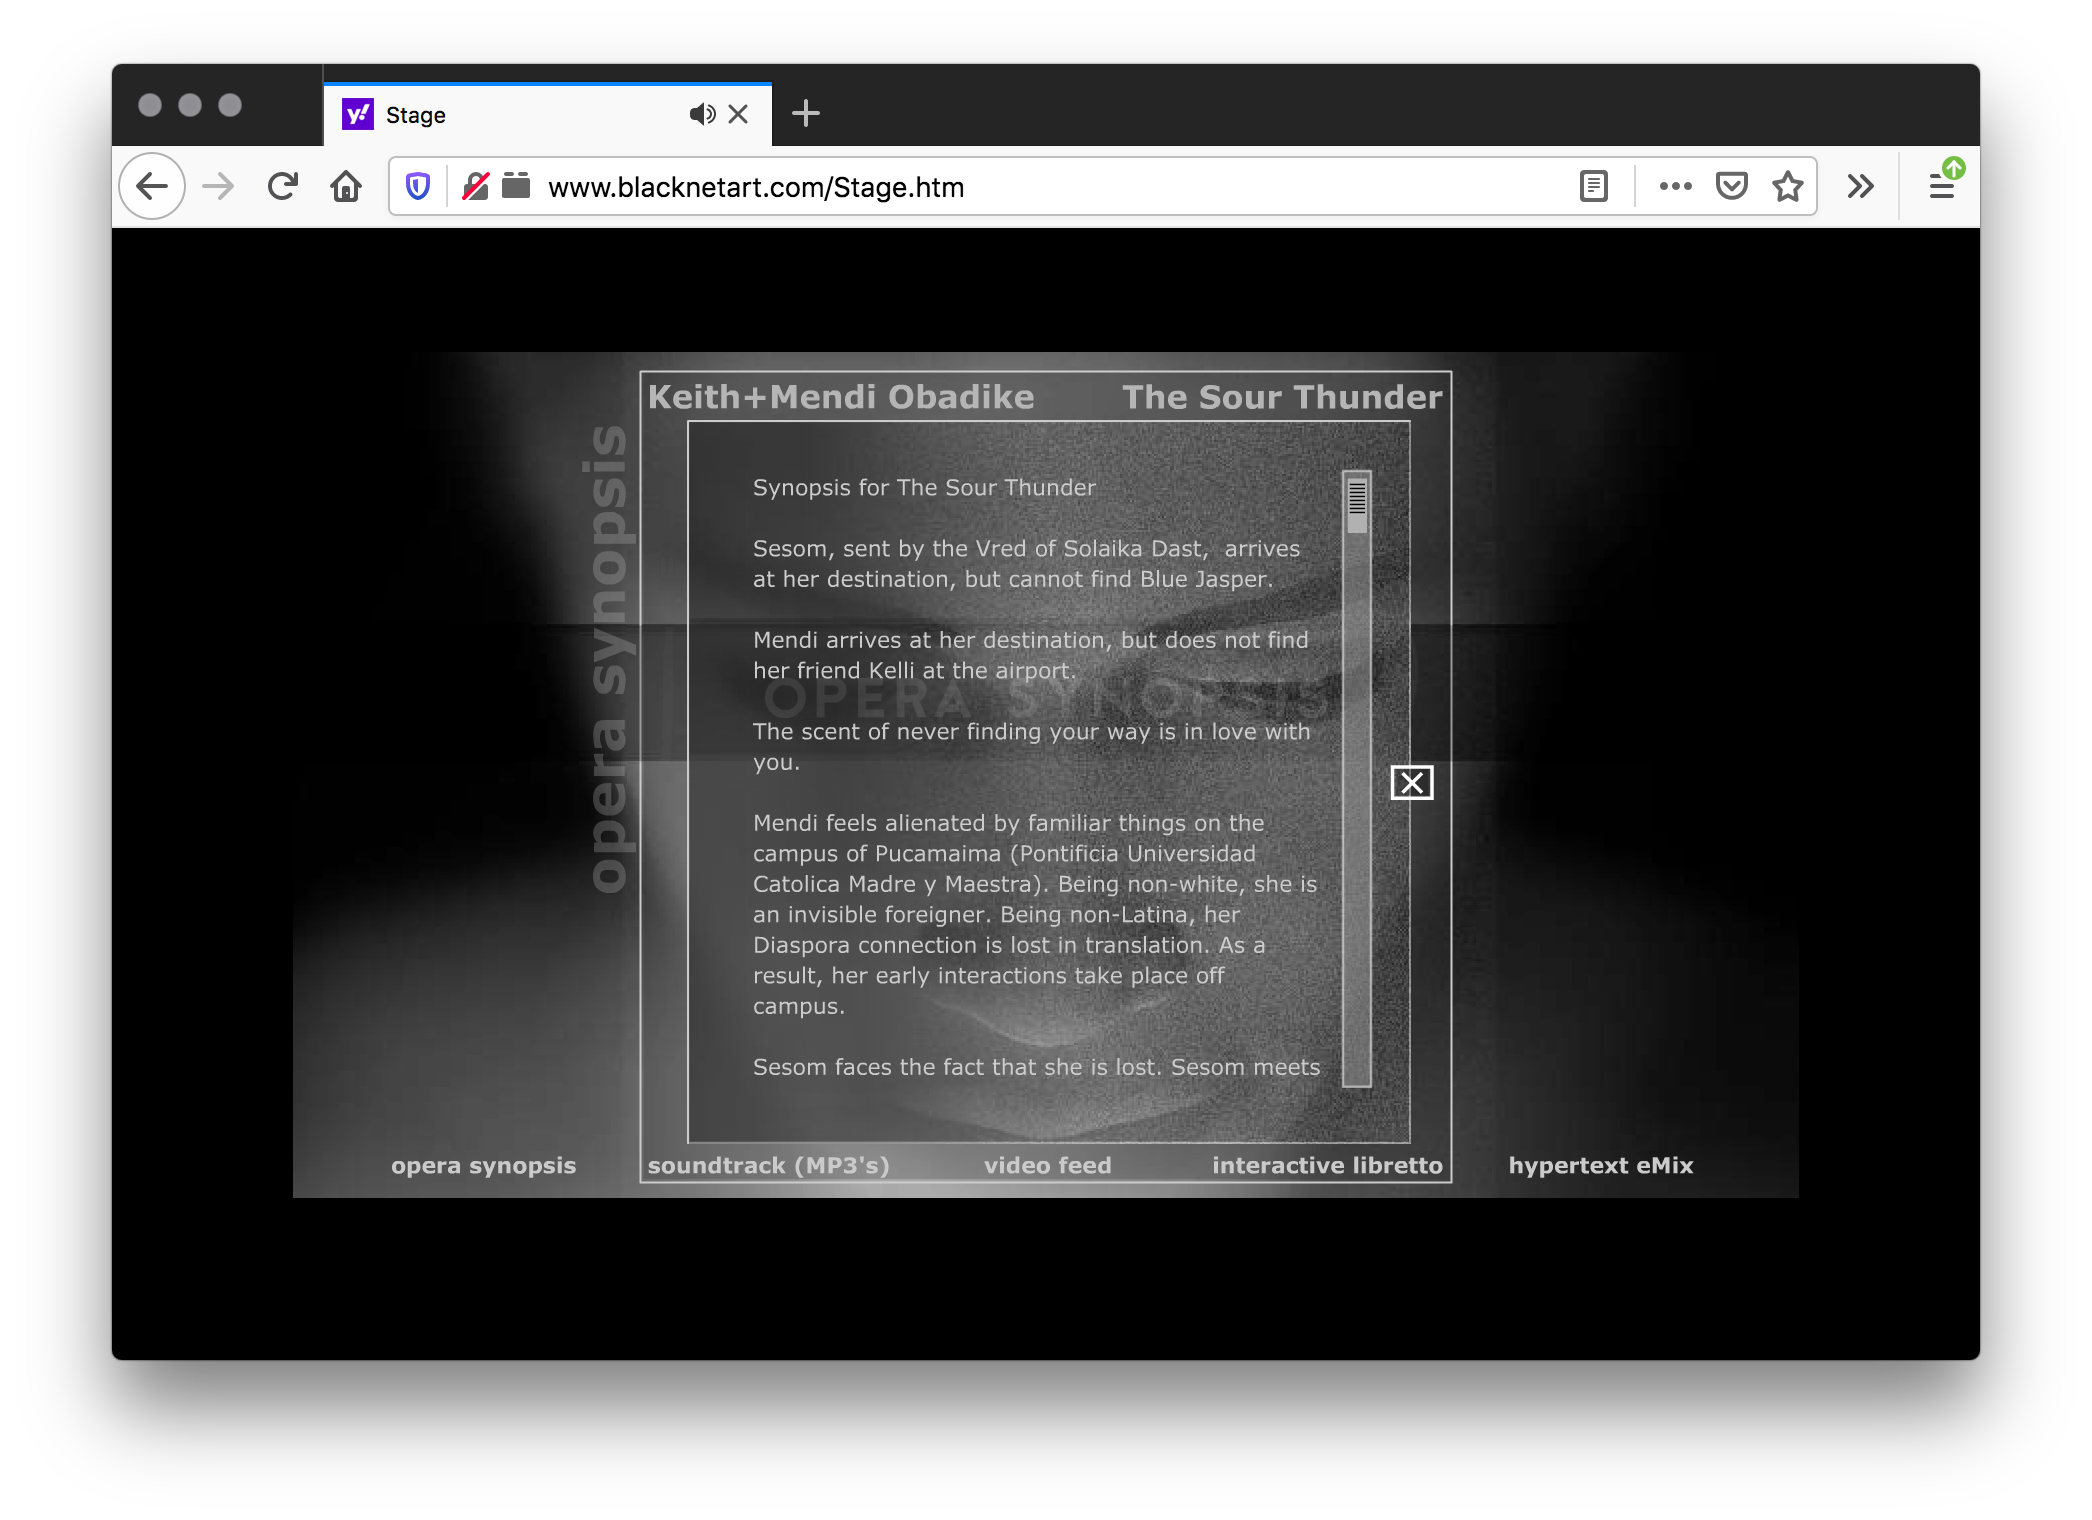 A screenshot of a black webpage with a holographic black and white image of a face looking down largely filling the screen. The center has a white outlined rectangle with white text along the top and bottom edges and a scrollable window filled with text.